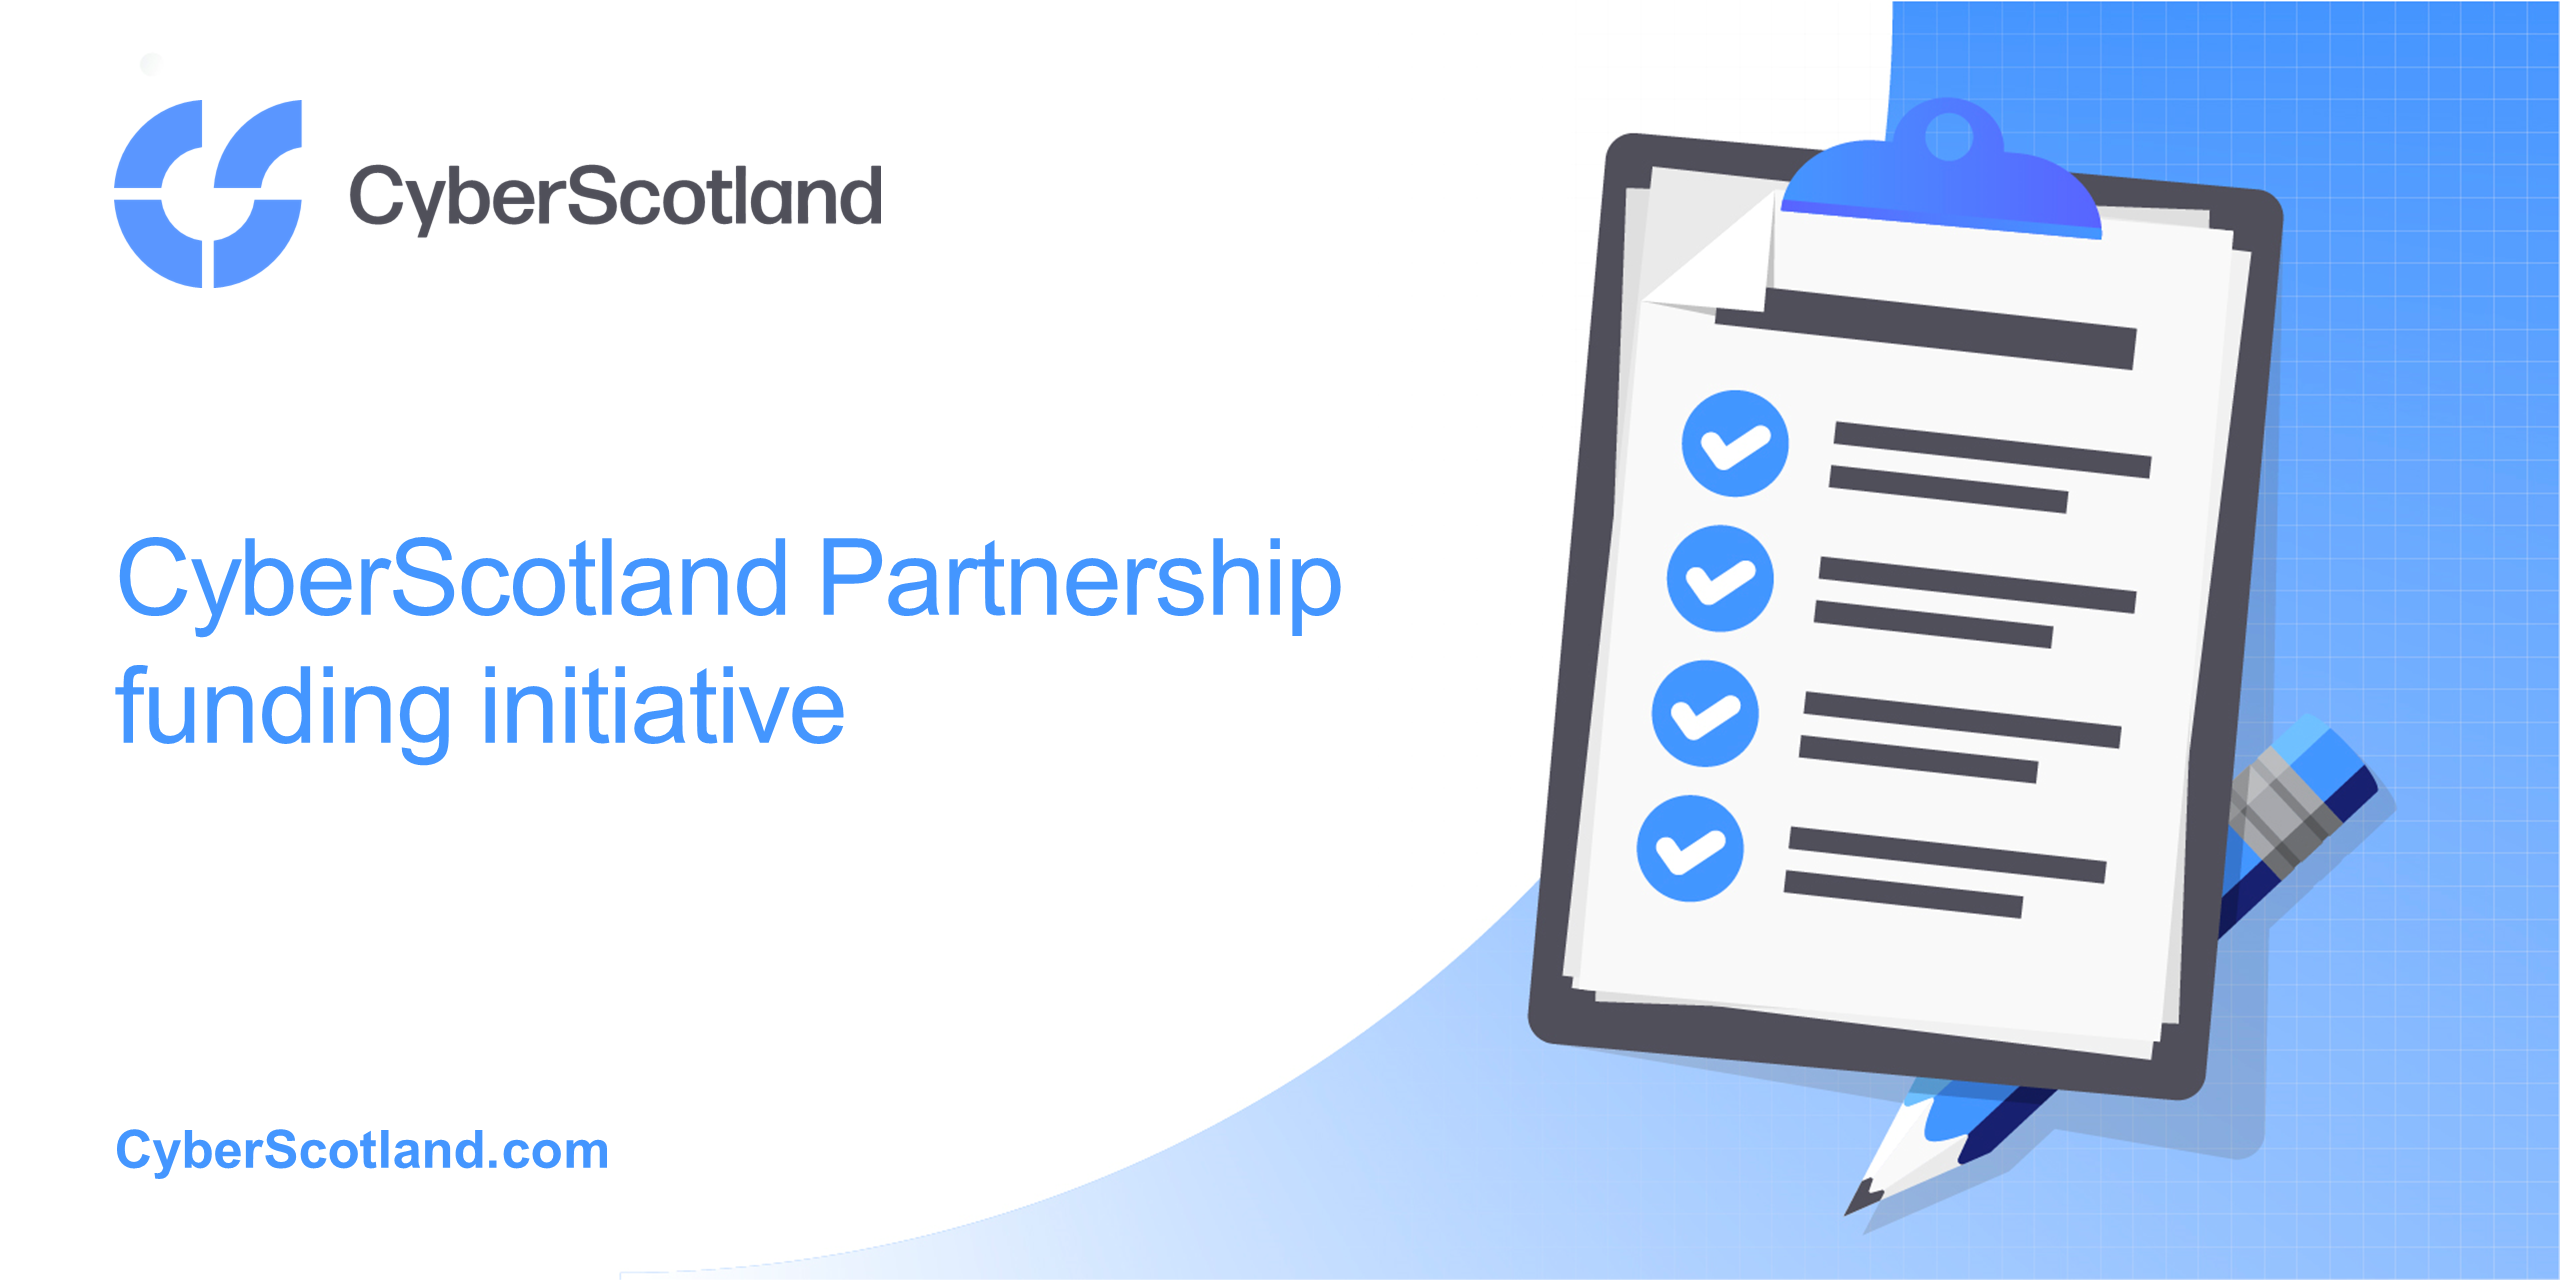 CyberScotland Partnership funding initiative now inviting proposals